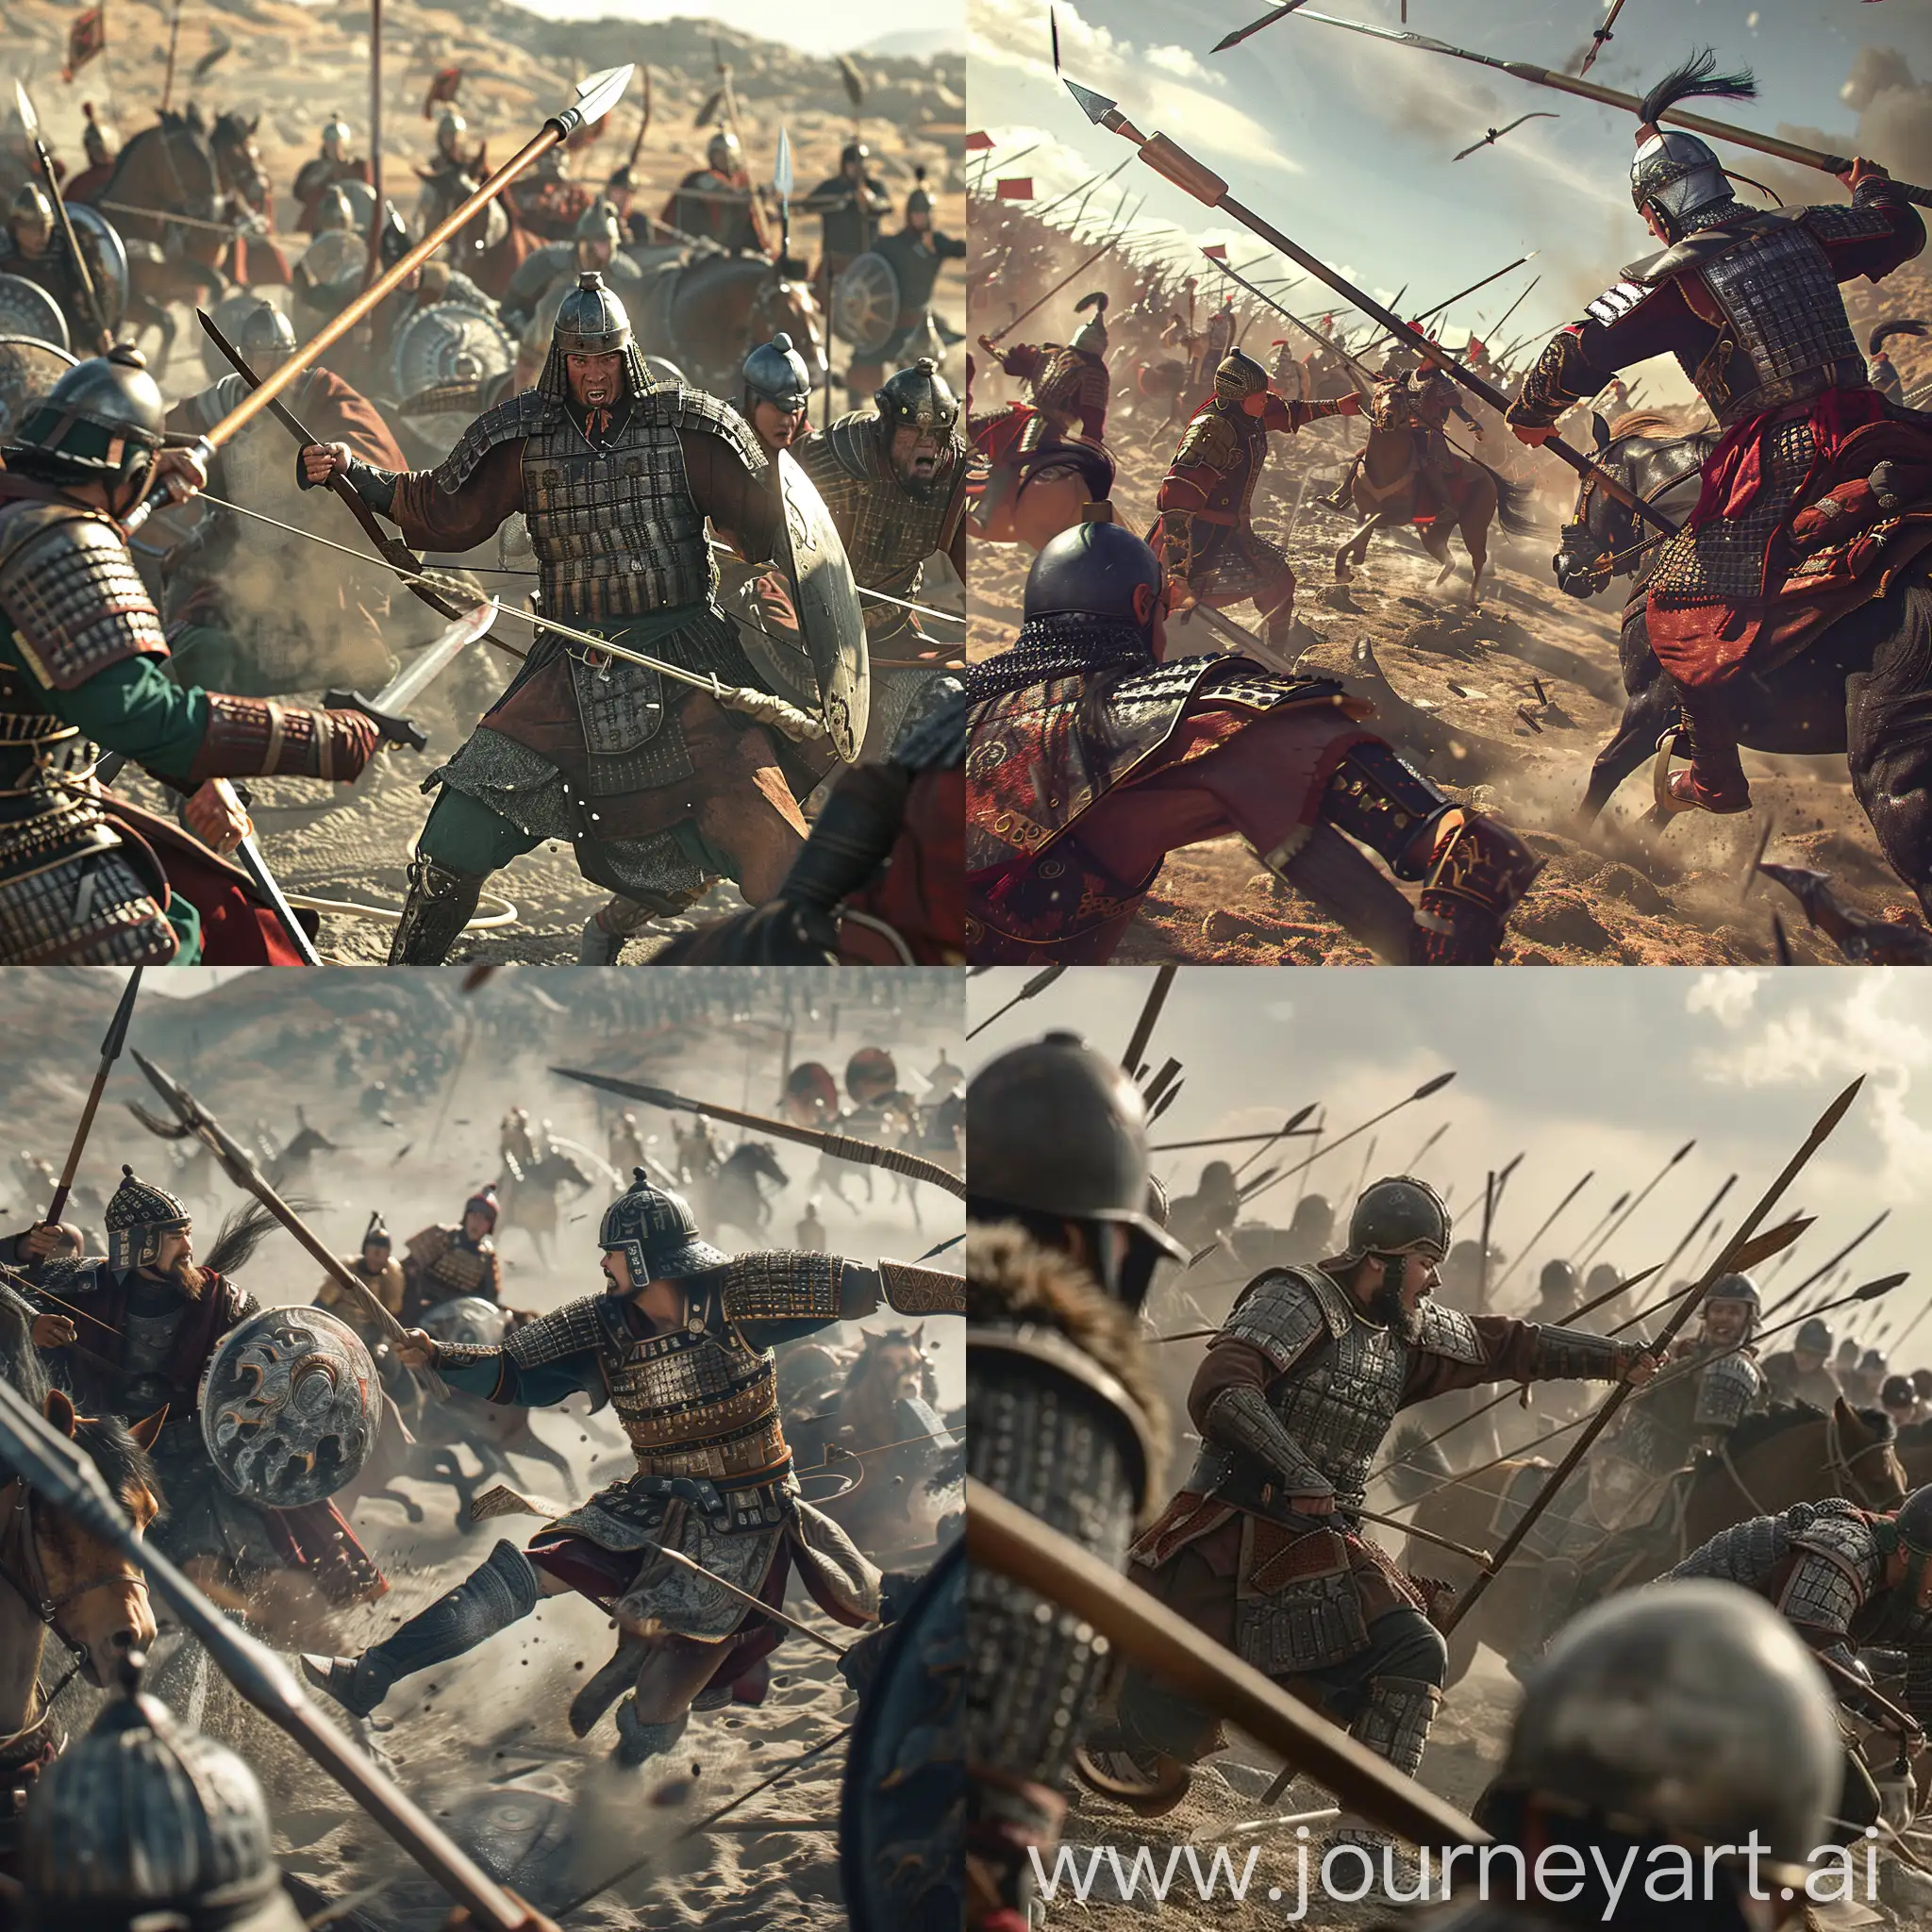 A dramatic scene of Qin warriors fighting against barbarians on the steppe. Qin soldiers wore armor and helmets, armed with weapons including long spears, swords, and crossbows against enemy cavalry. Images are enhanced with the best 8k HDR quality, creating stunningly realistic scenes